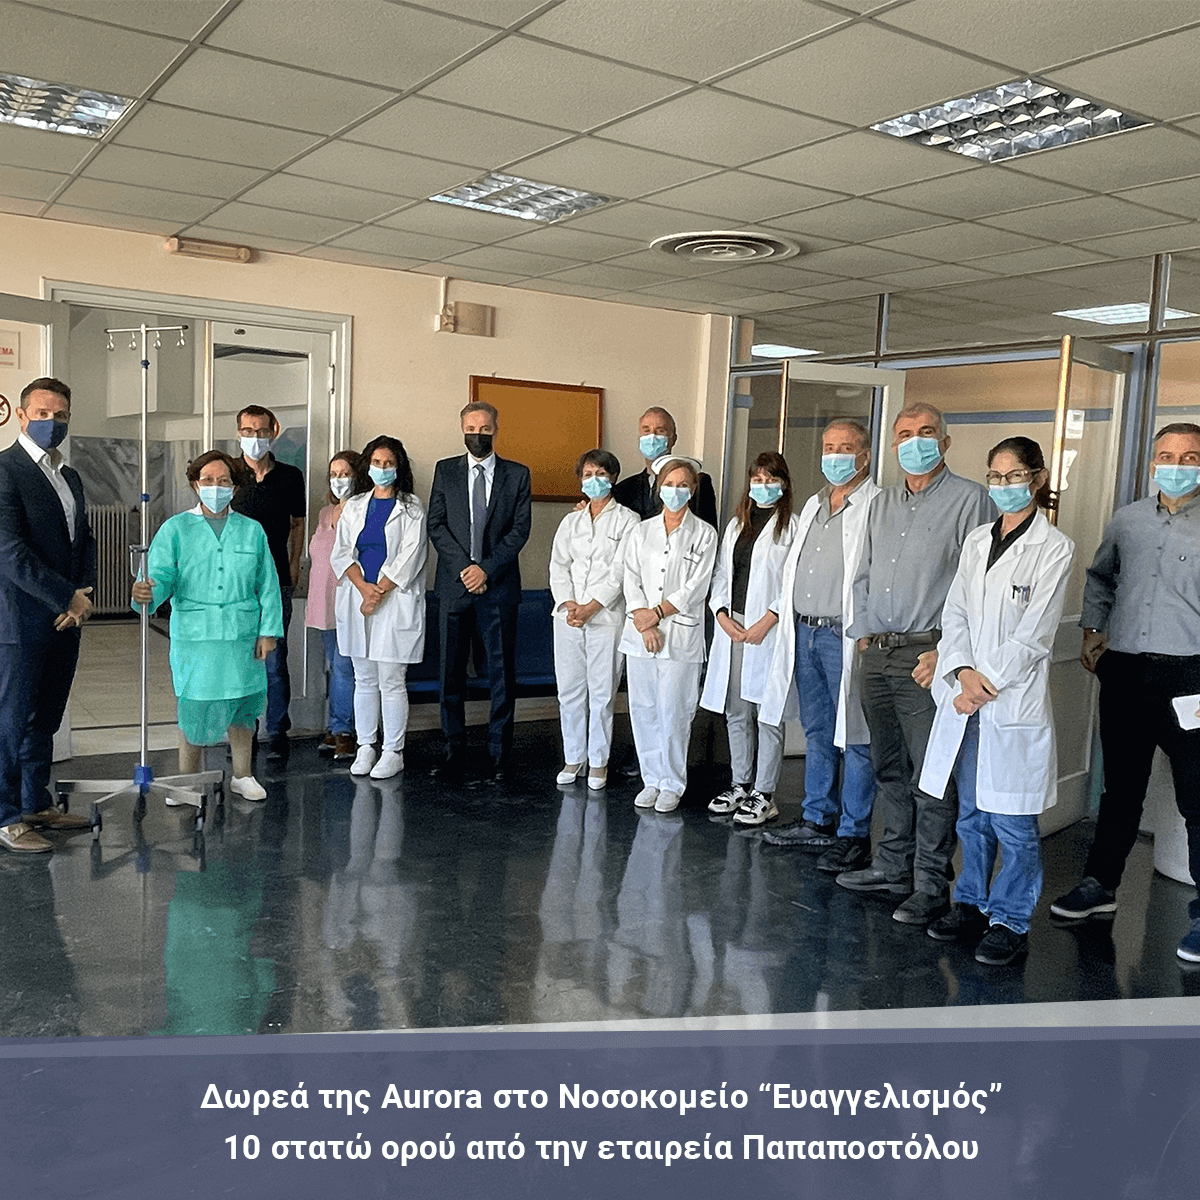 Aurora donated 10 state of the art IV fluid stands to the Hematology Unit of Evangelismos Hospital.